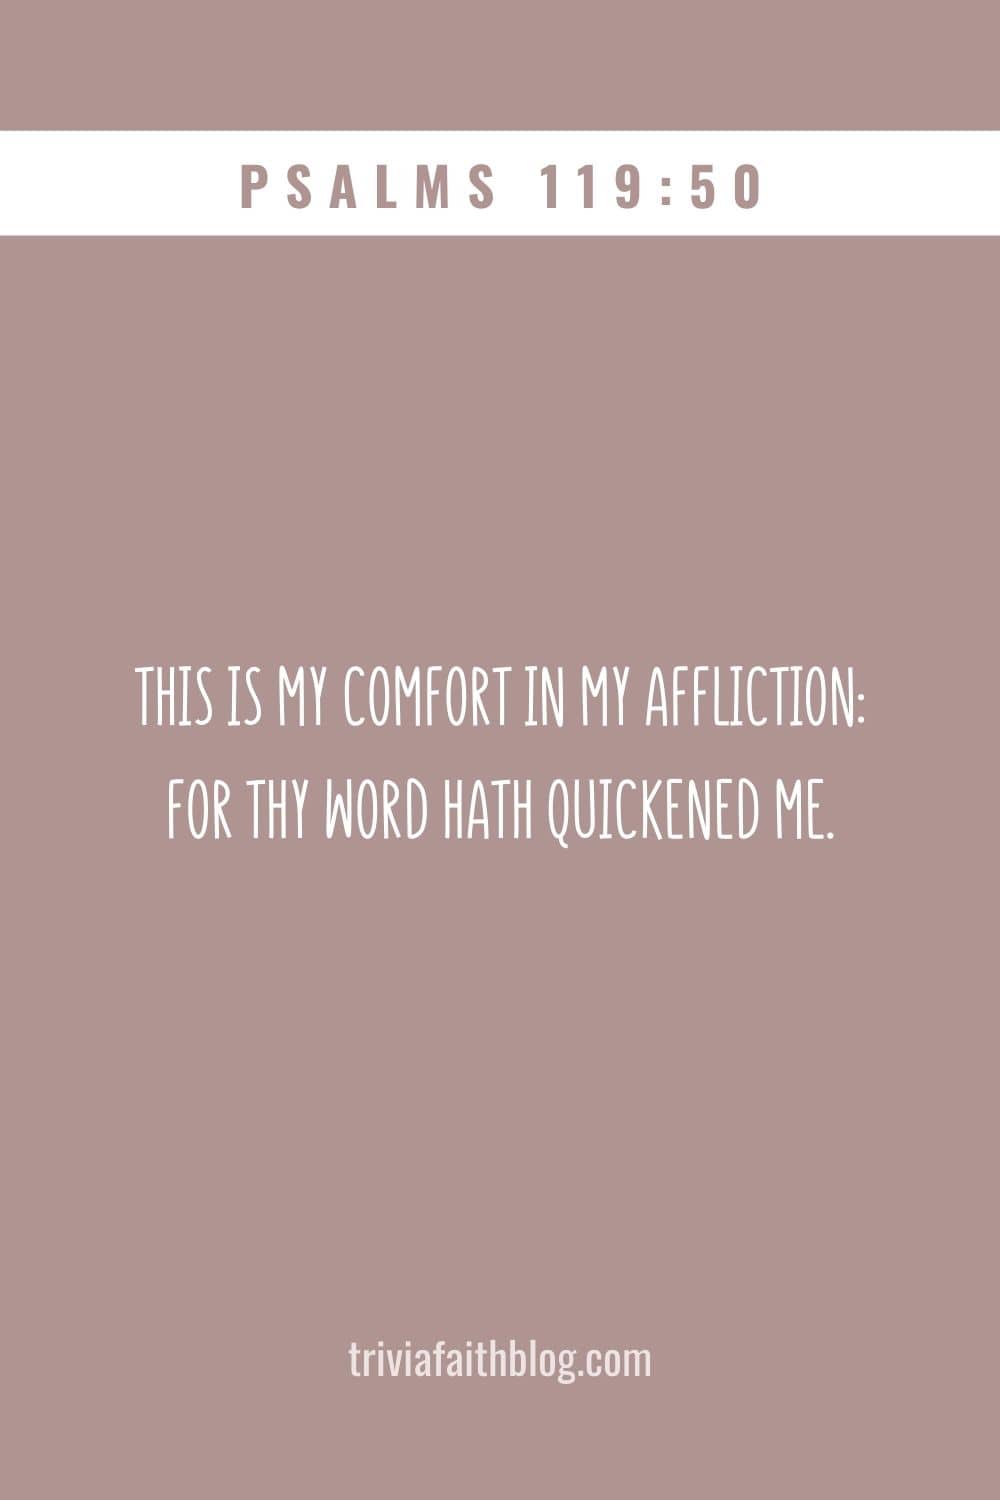 This is my comfort in my affliction for thy word hath quickened me